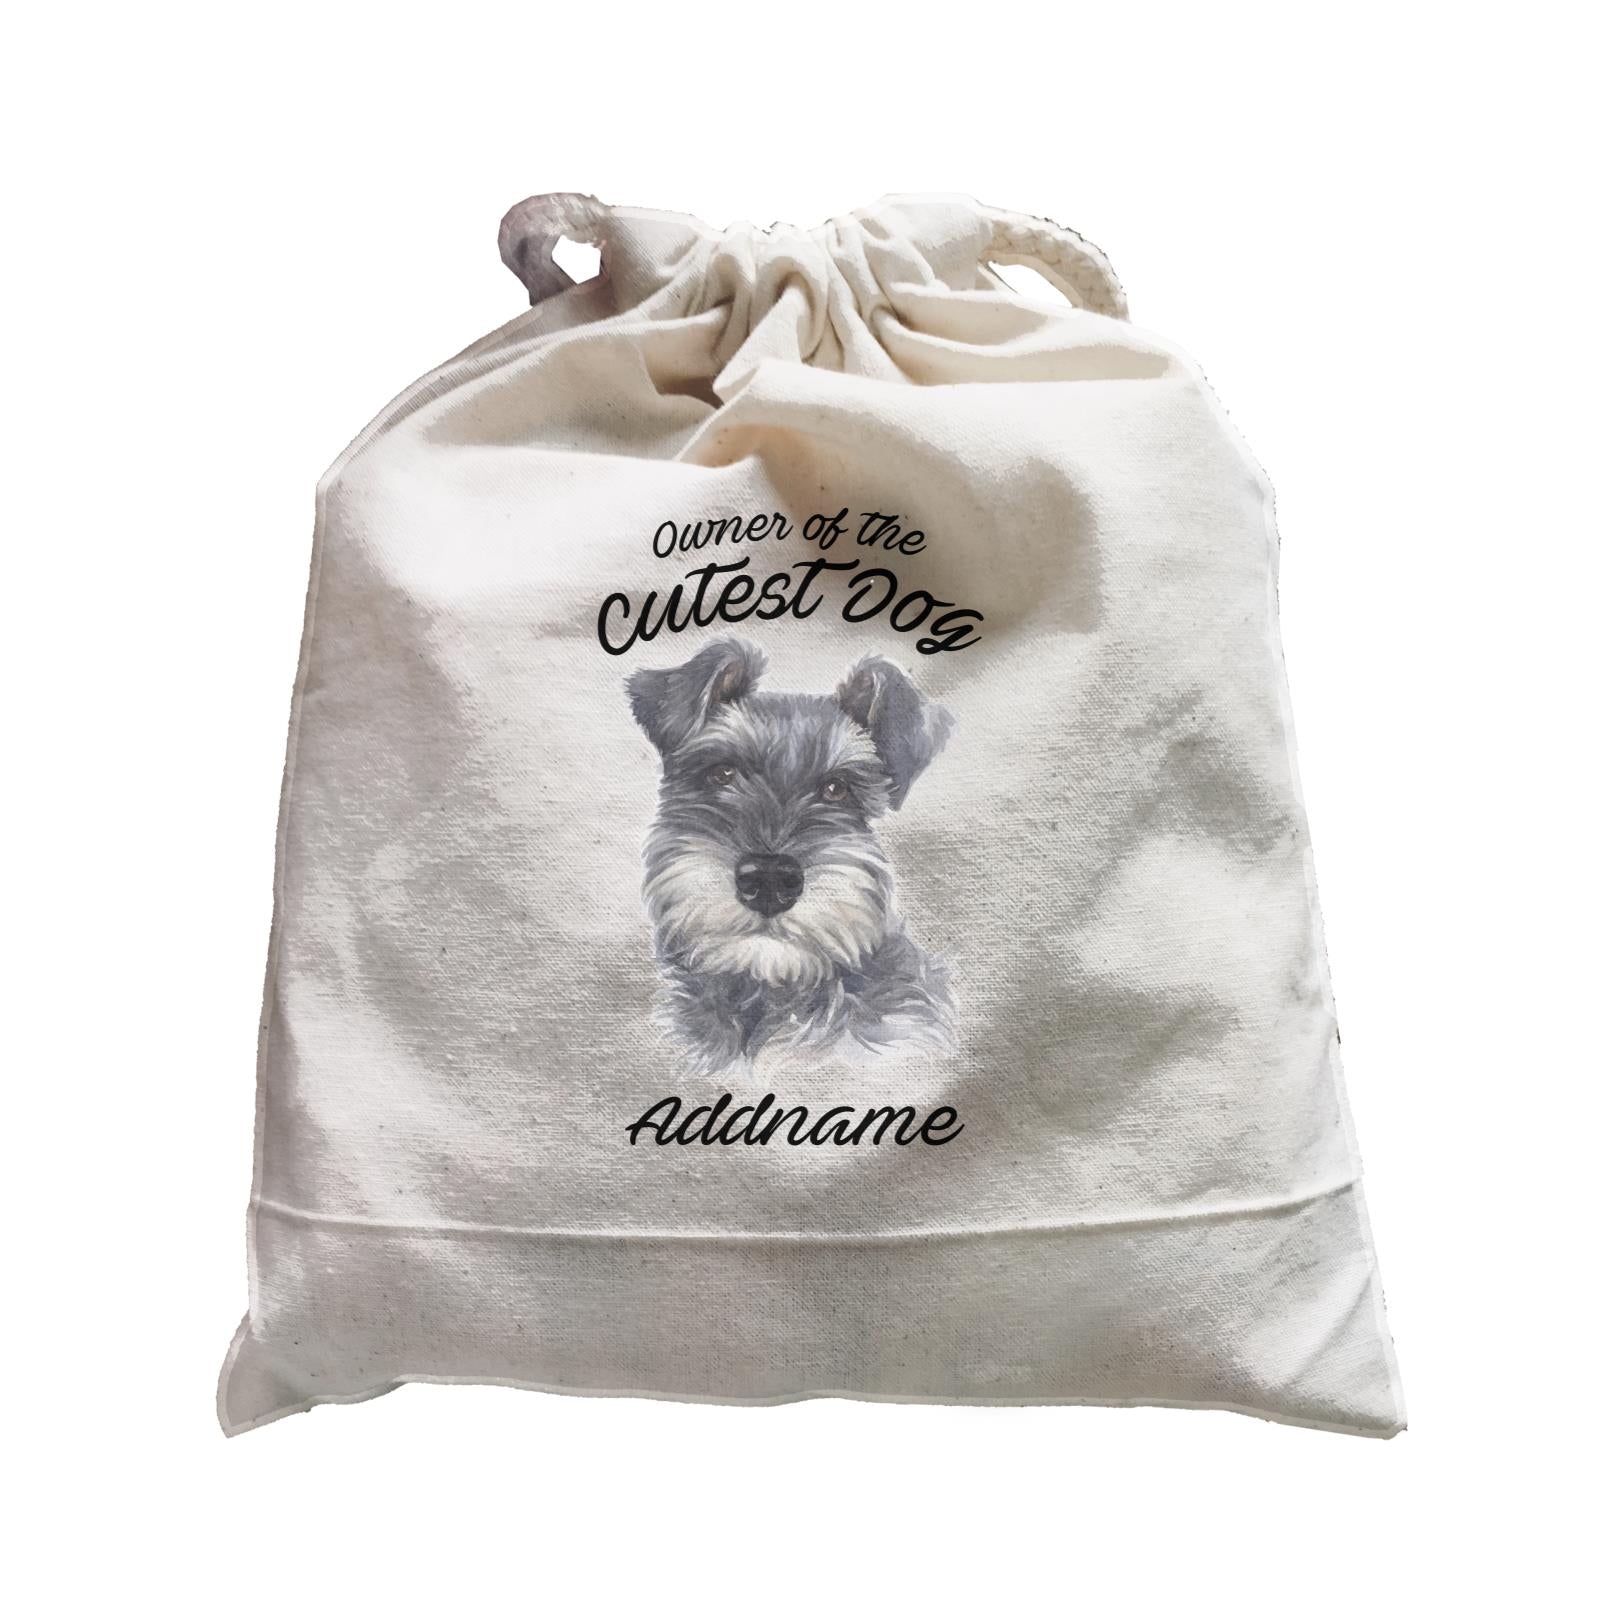 Watercolor Dog Owner Of The Cutest Dog Schnauzer Black Addname Satchel